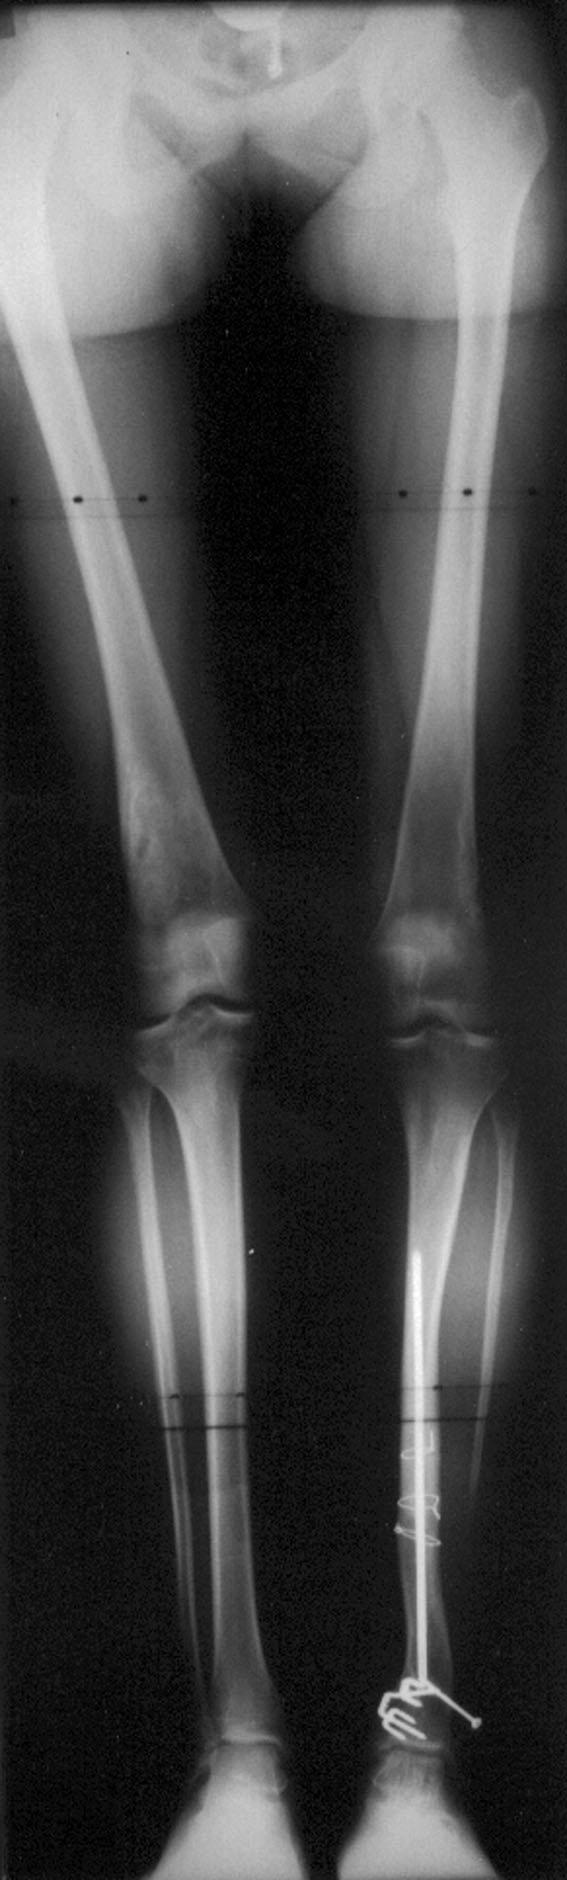 1193 Five patients required amputation because of chronic lower-extremity dysfunction: two, because of recurrent fracture nonunion; two, because of limb-length discrepancy; and one, because of